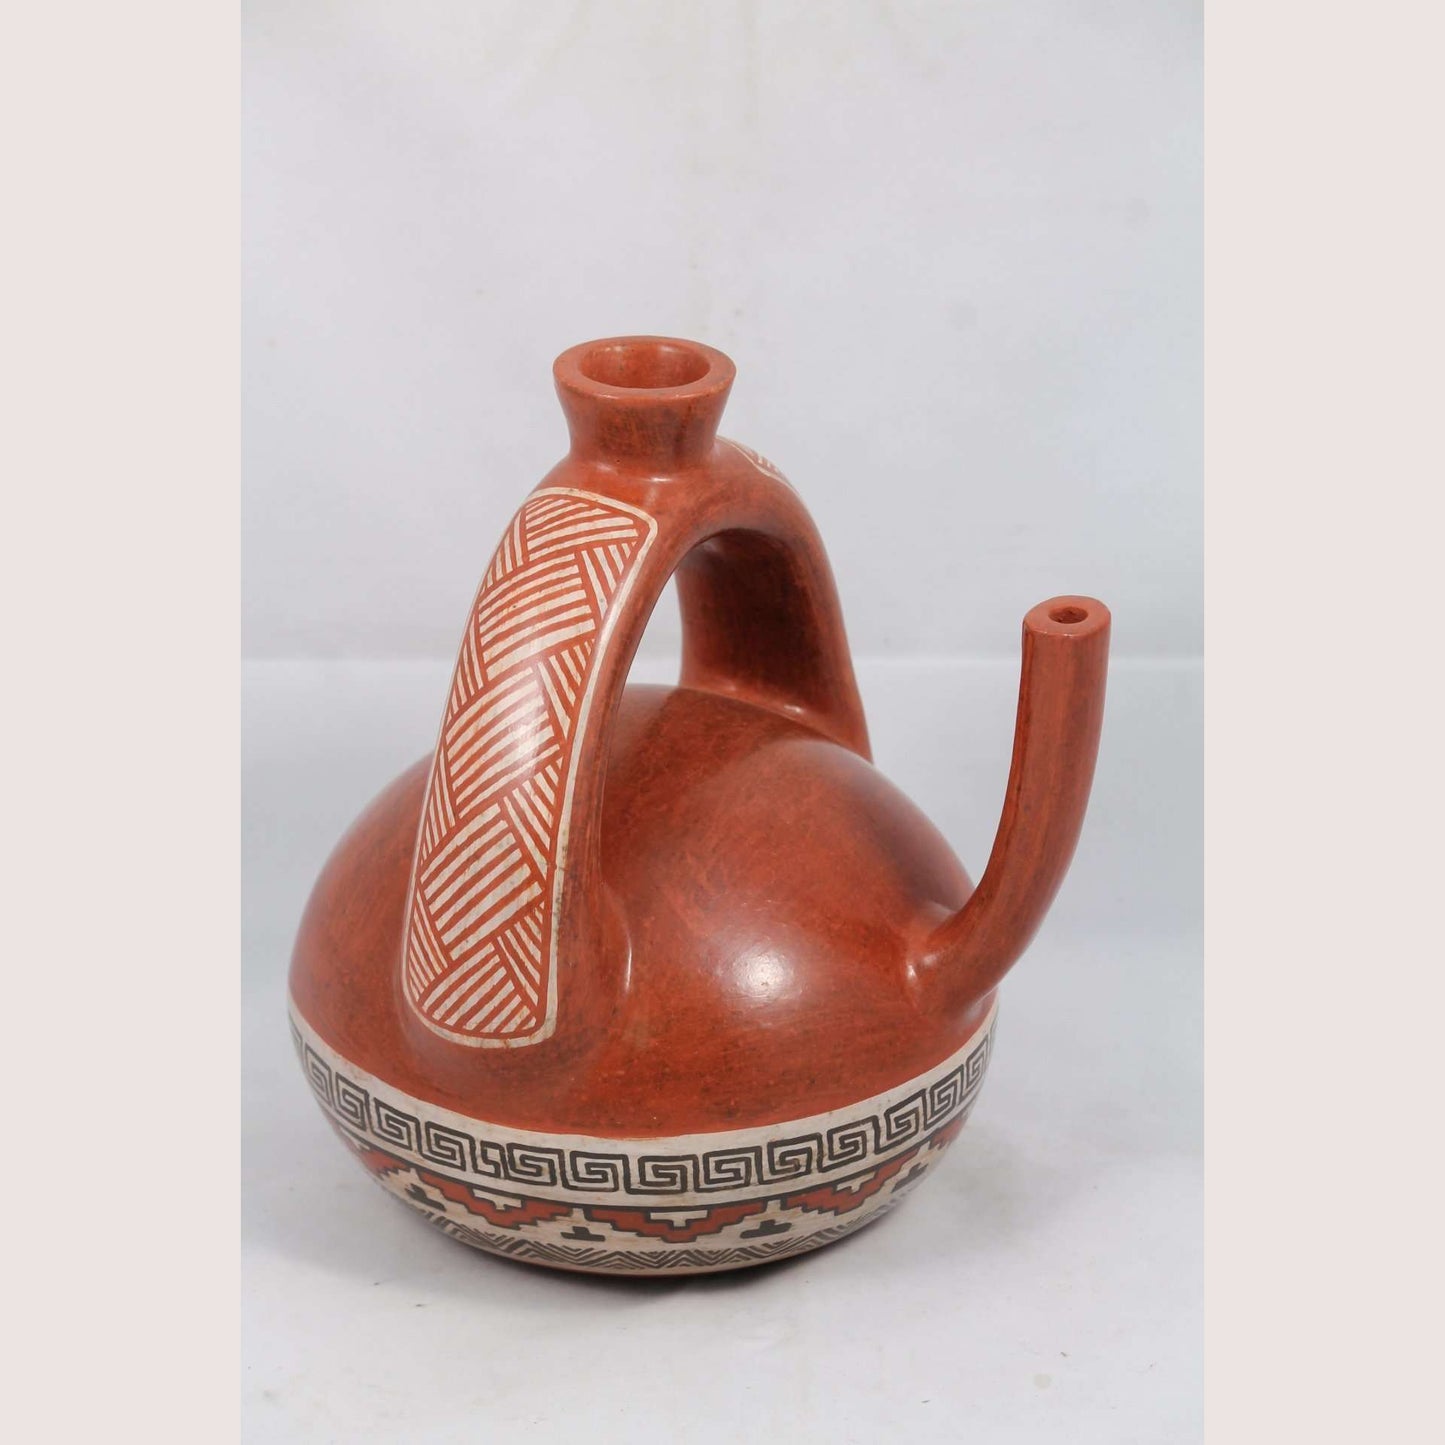 Ceramic Pitcher Hand Made Pottery Mexican Folk Art Potter Signed Huipe Spout